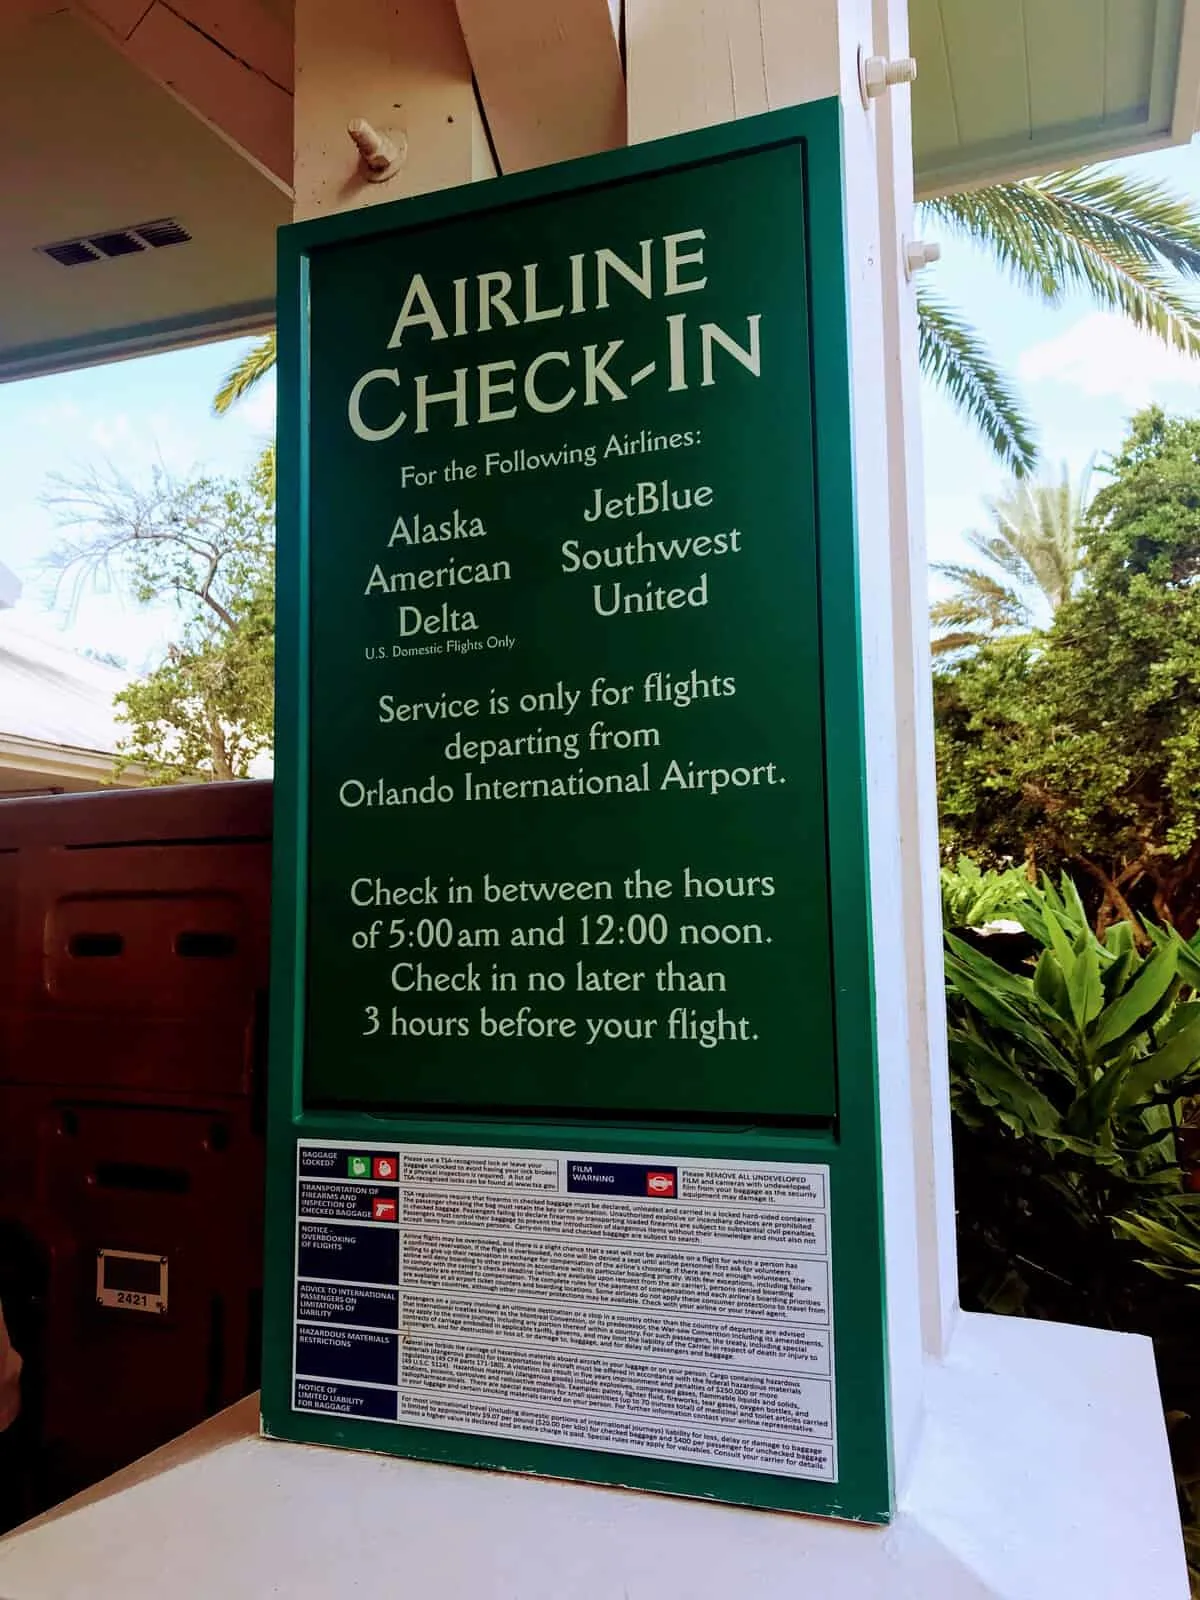 How Resort Airline Check-In at Disney World works (Not Currently Available)